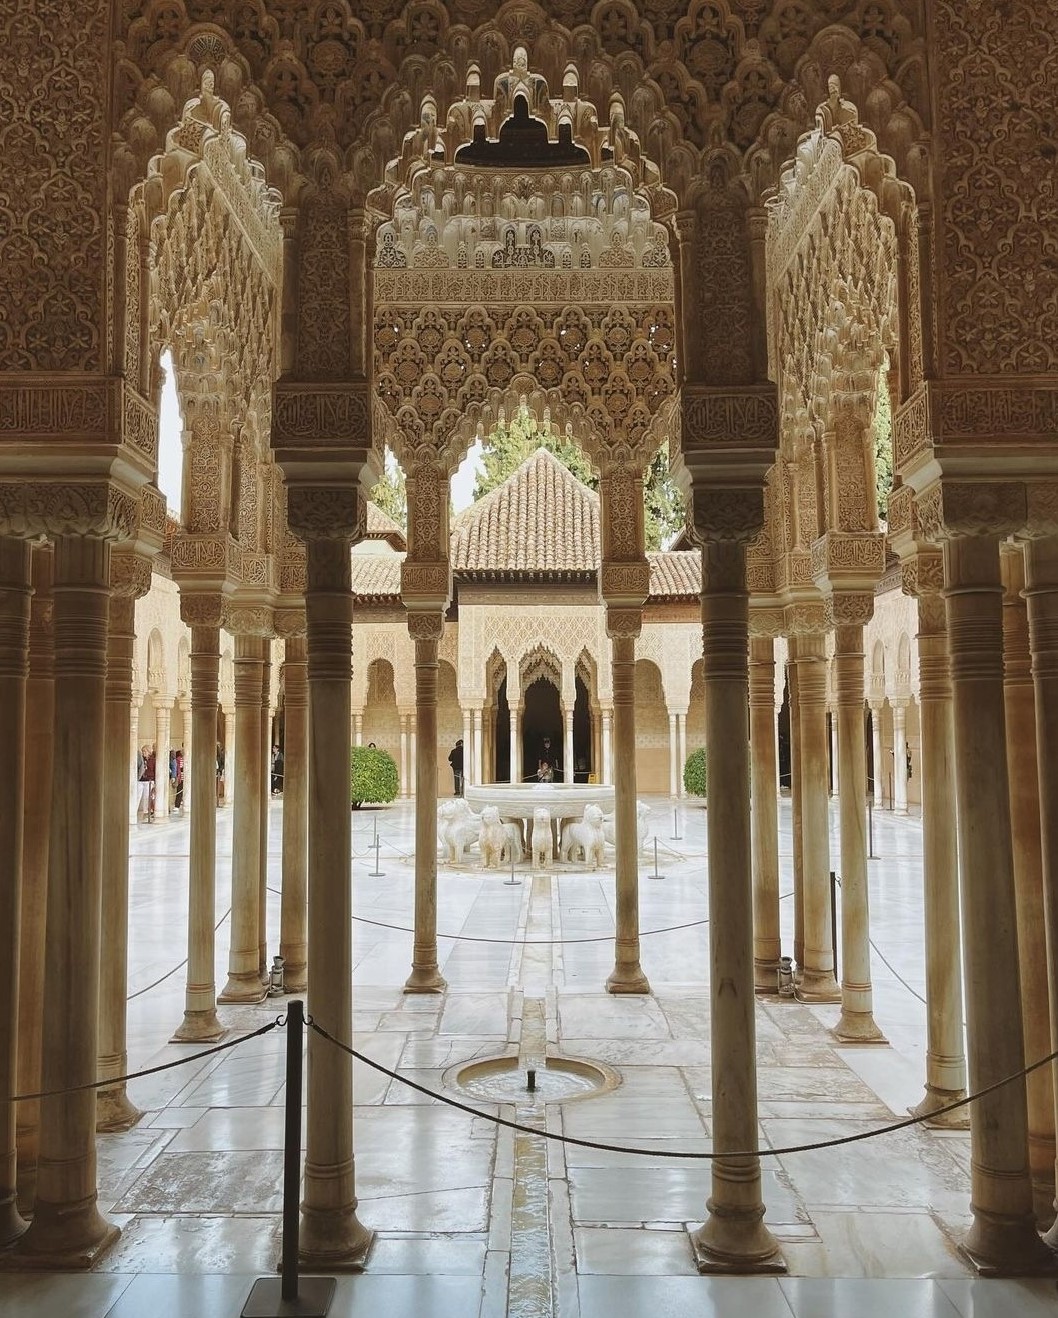 The Court of the Lions or Palace of the Lions is a palace in the heart of the Alhambra